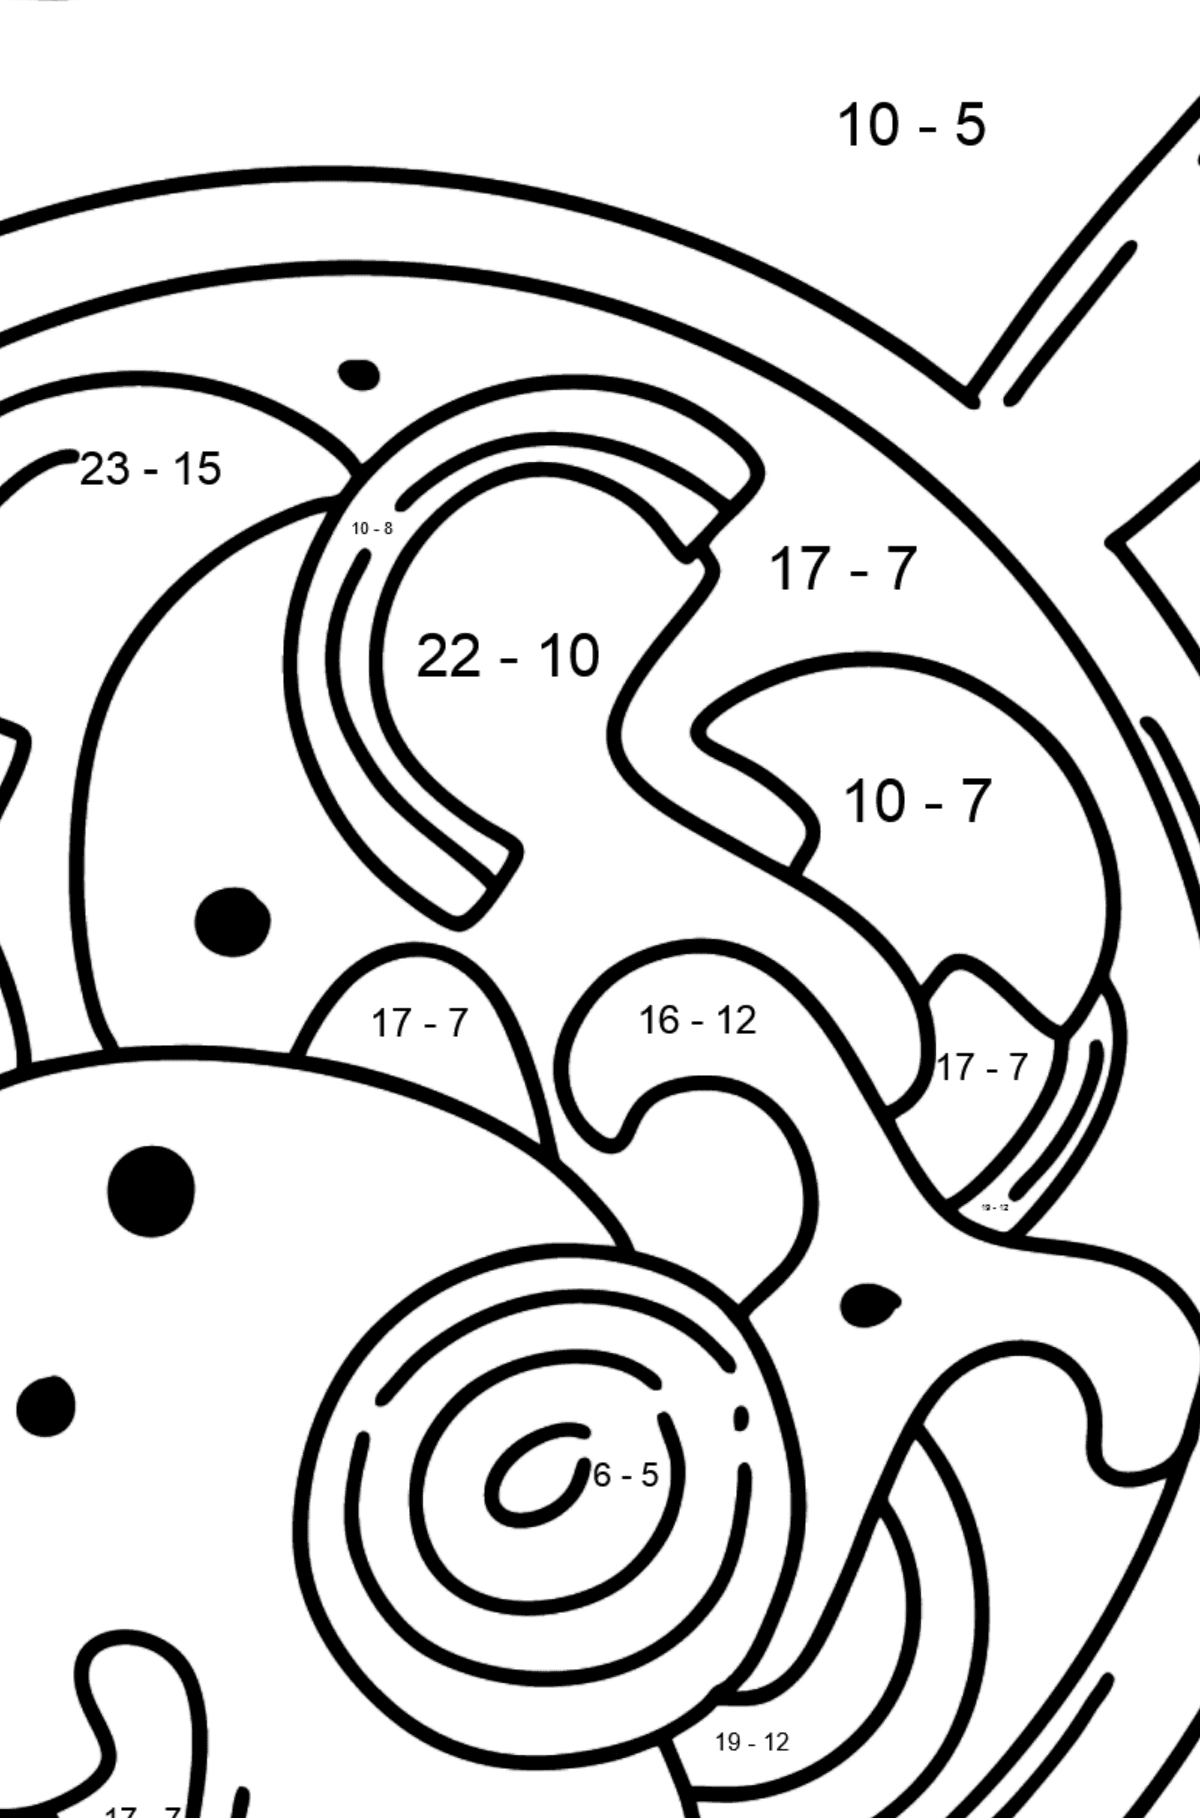 Mushrooms in Creamy Sauce coloring page - Math Coloring - Subtraction for Kids